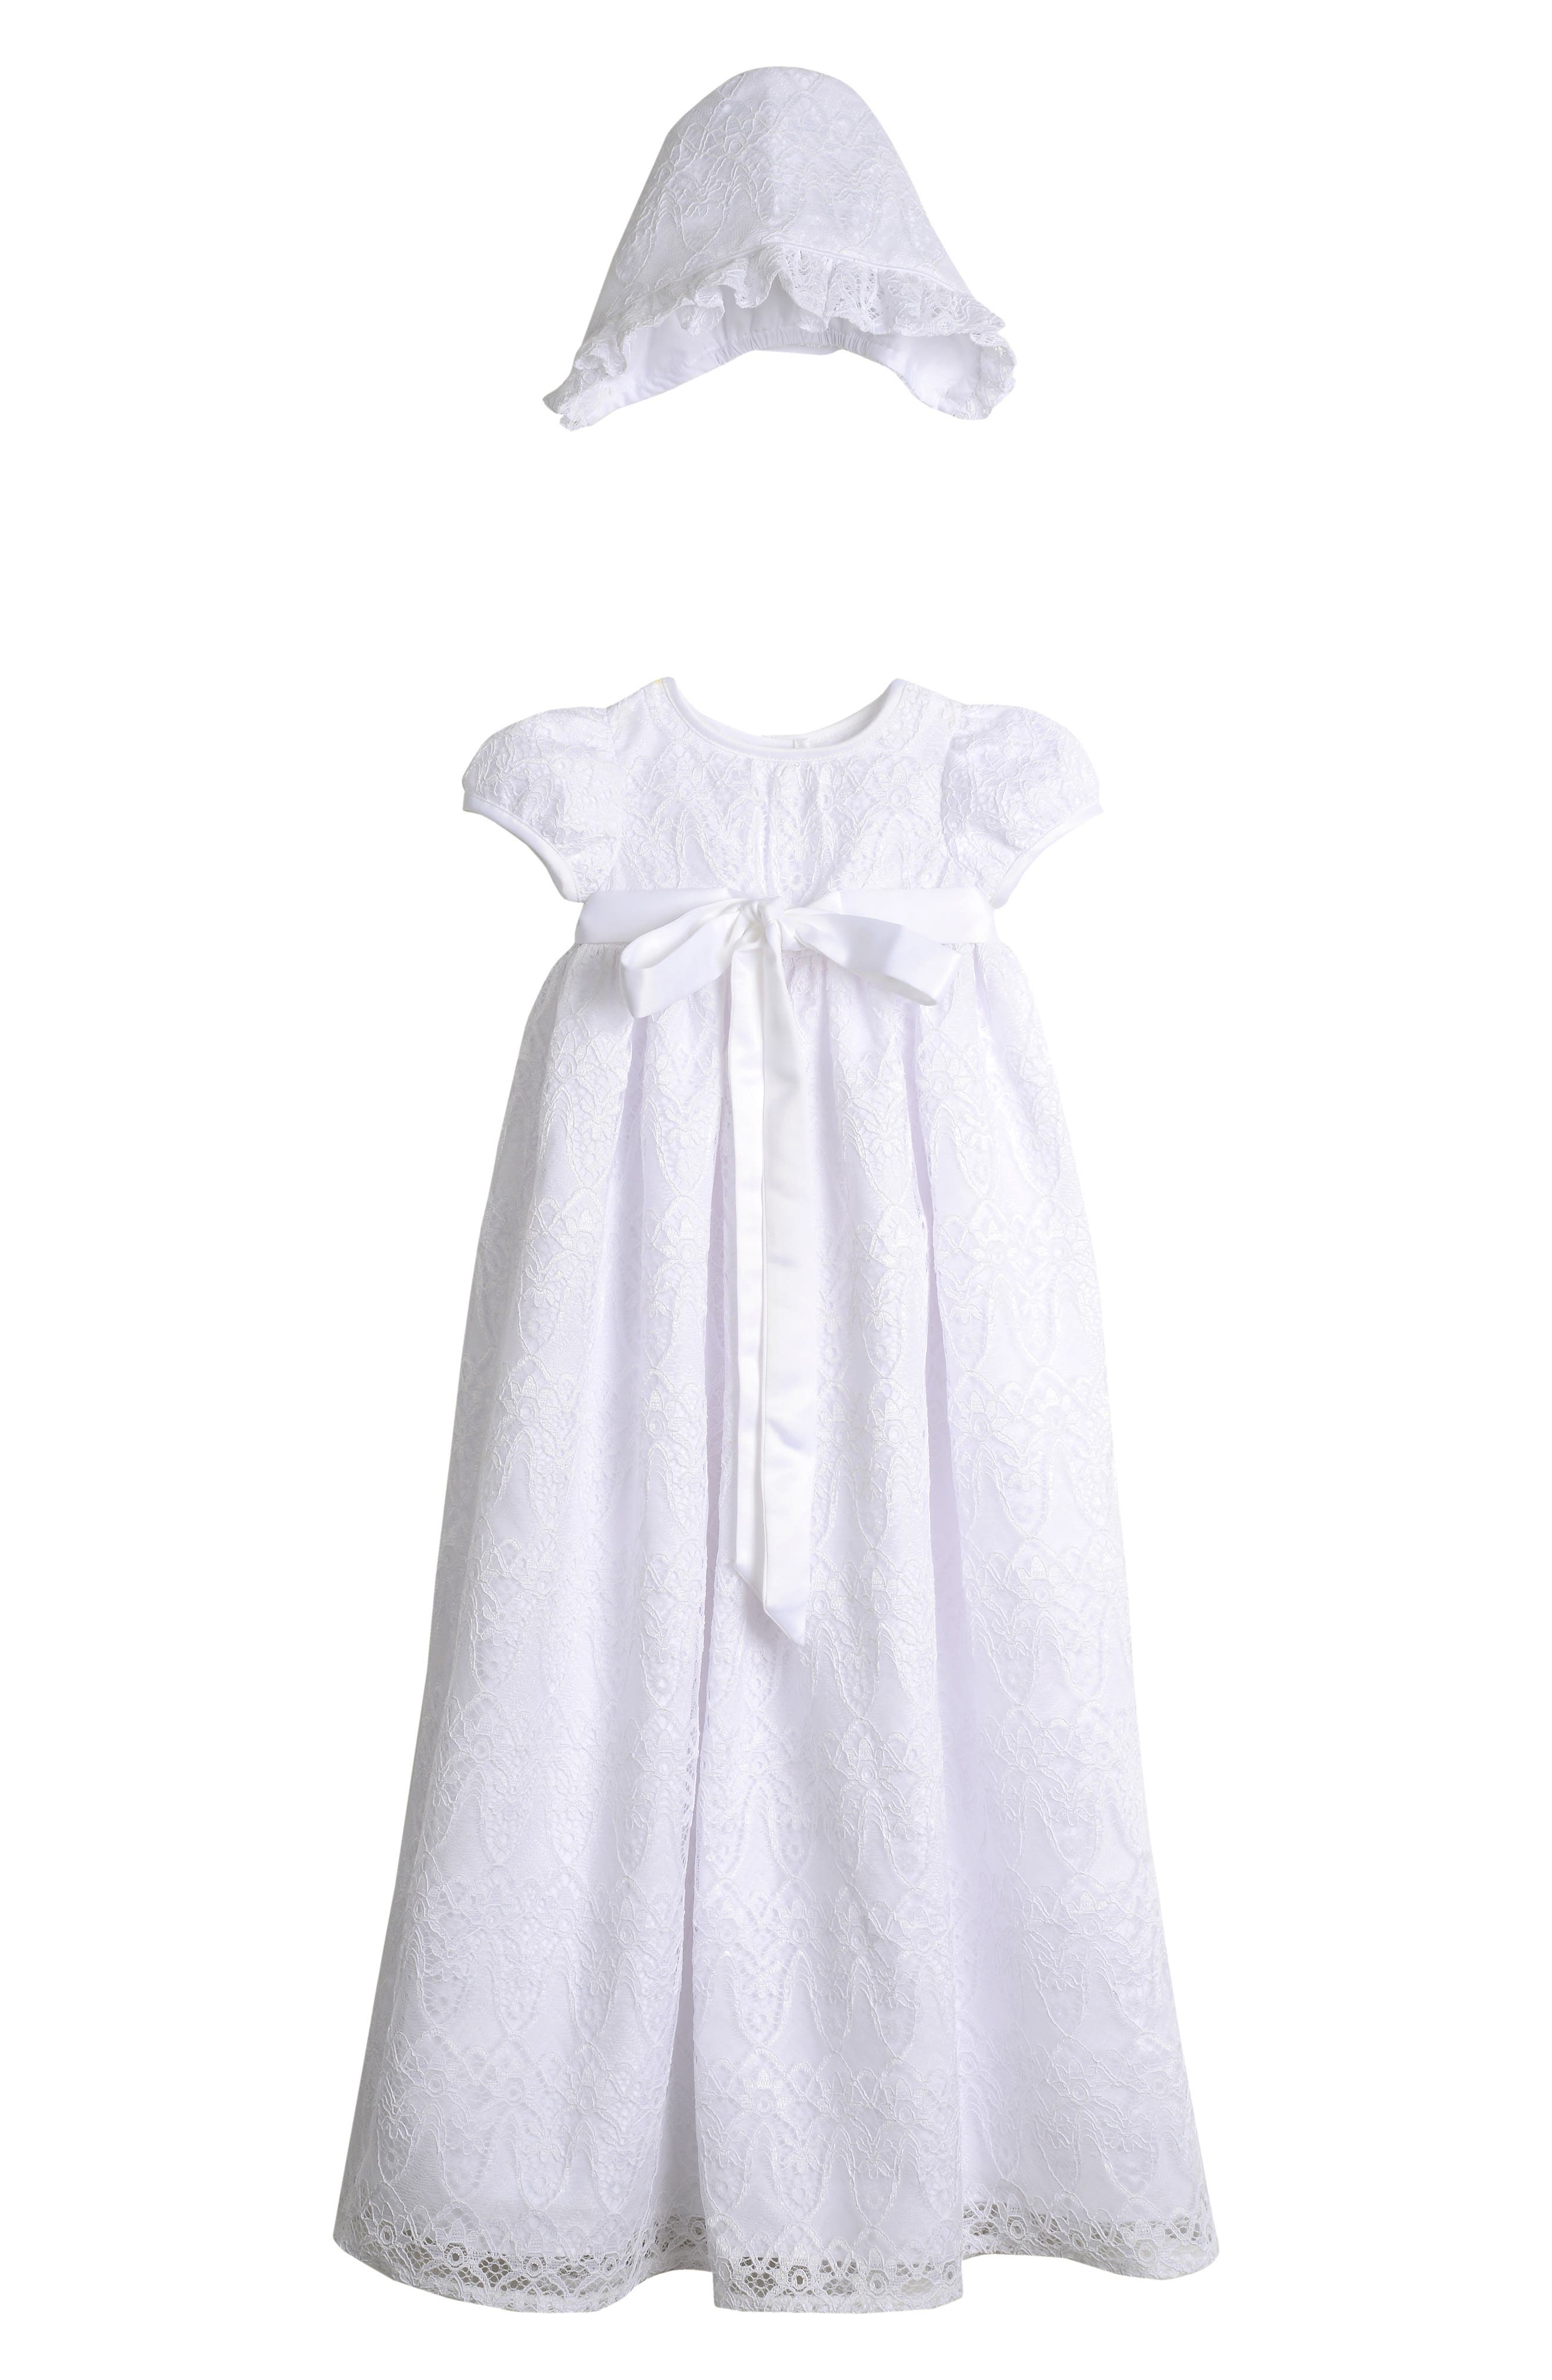 nordstrom christening outfits